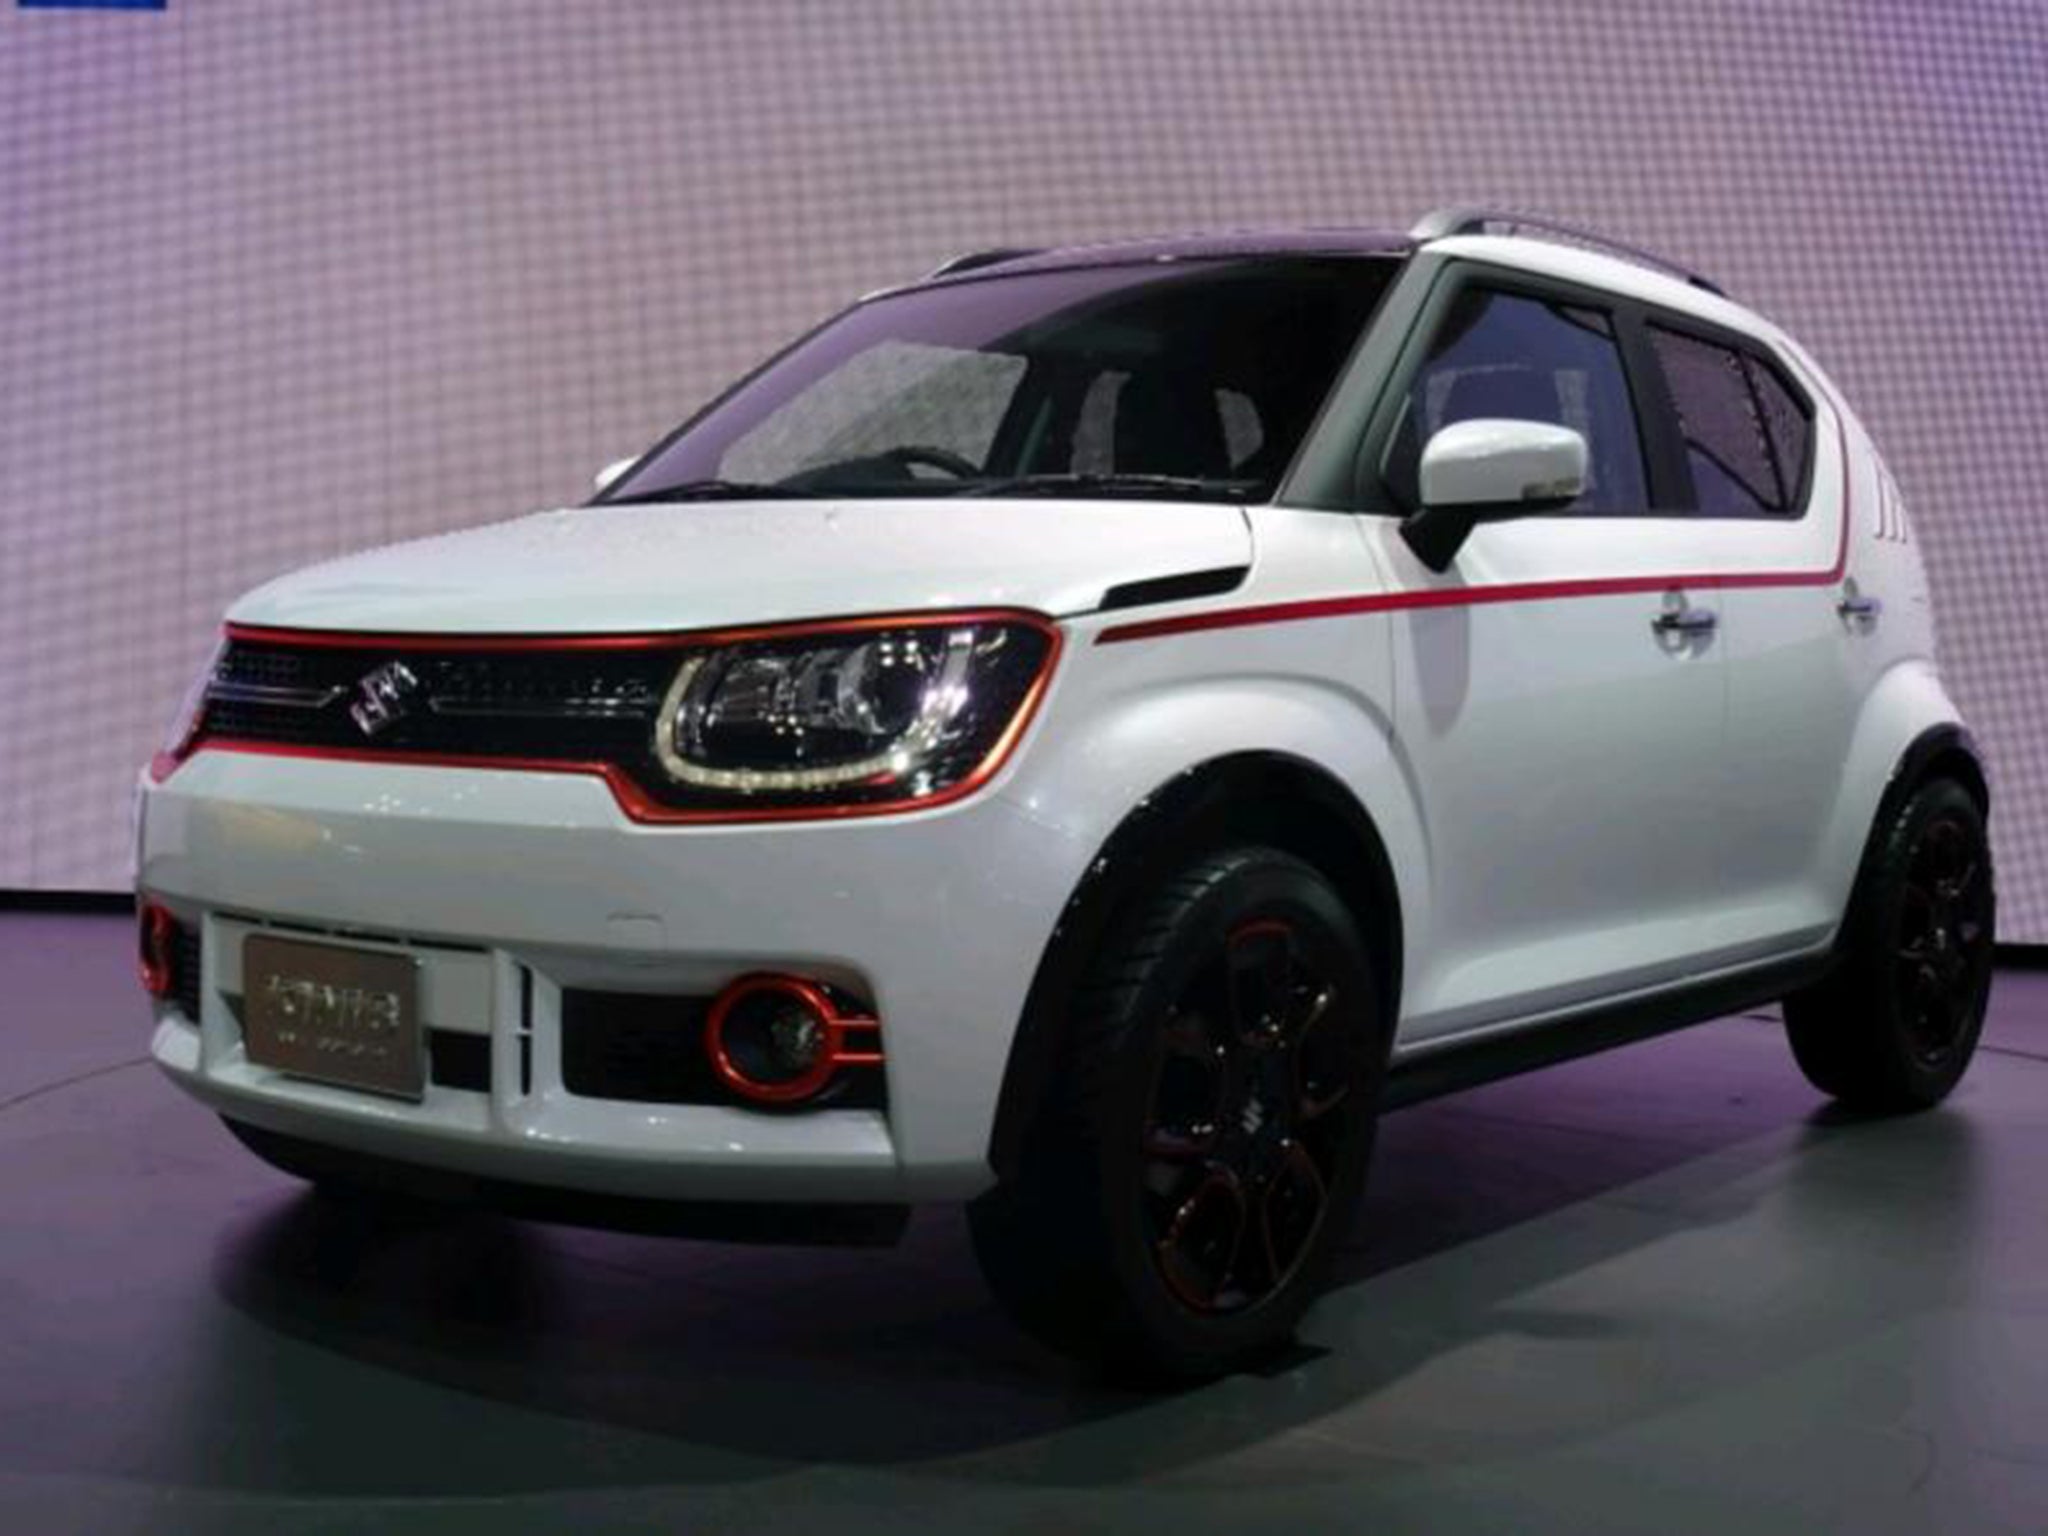 Suzuki unveiled the car at the recent Toyota show